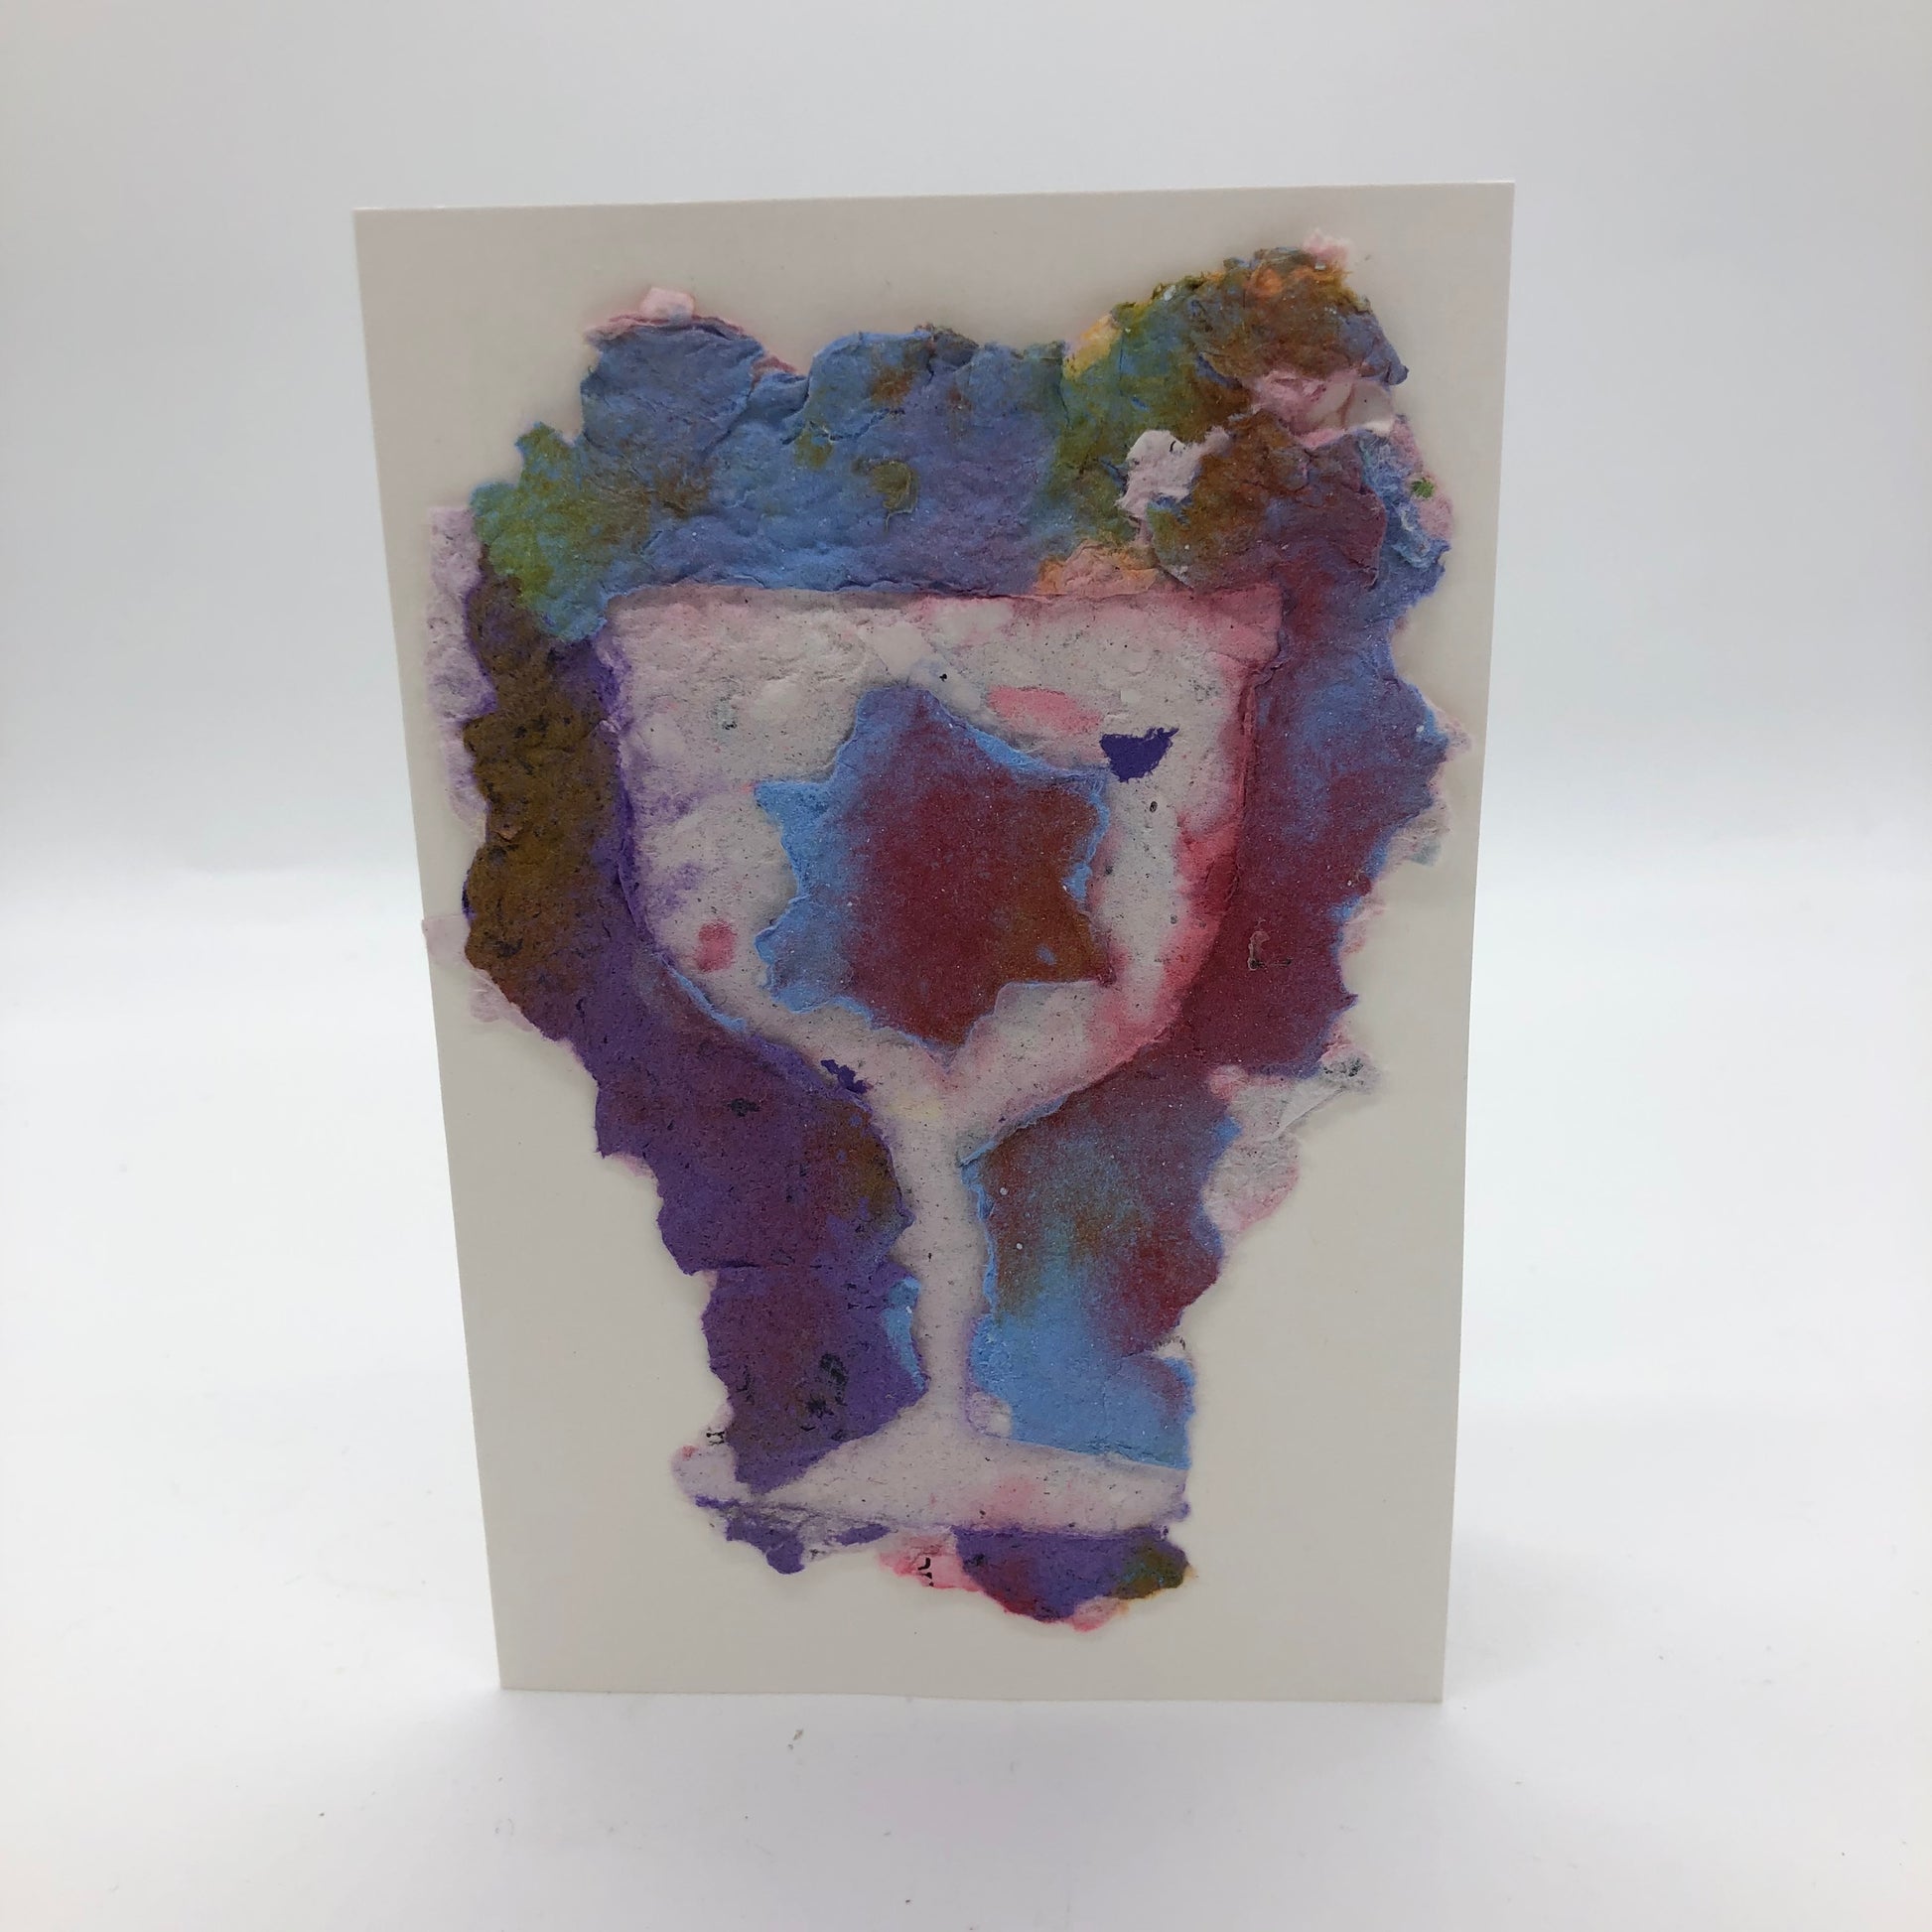 Handmade paper greeting card with white Kiddush cup and maroon/light blue Jewish star against maroon, purple and light blue background